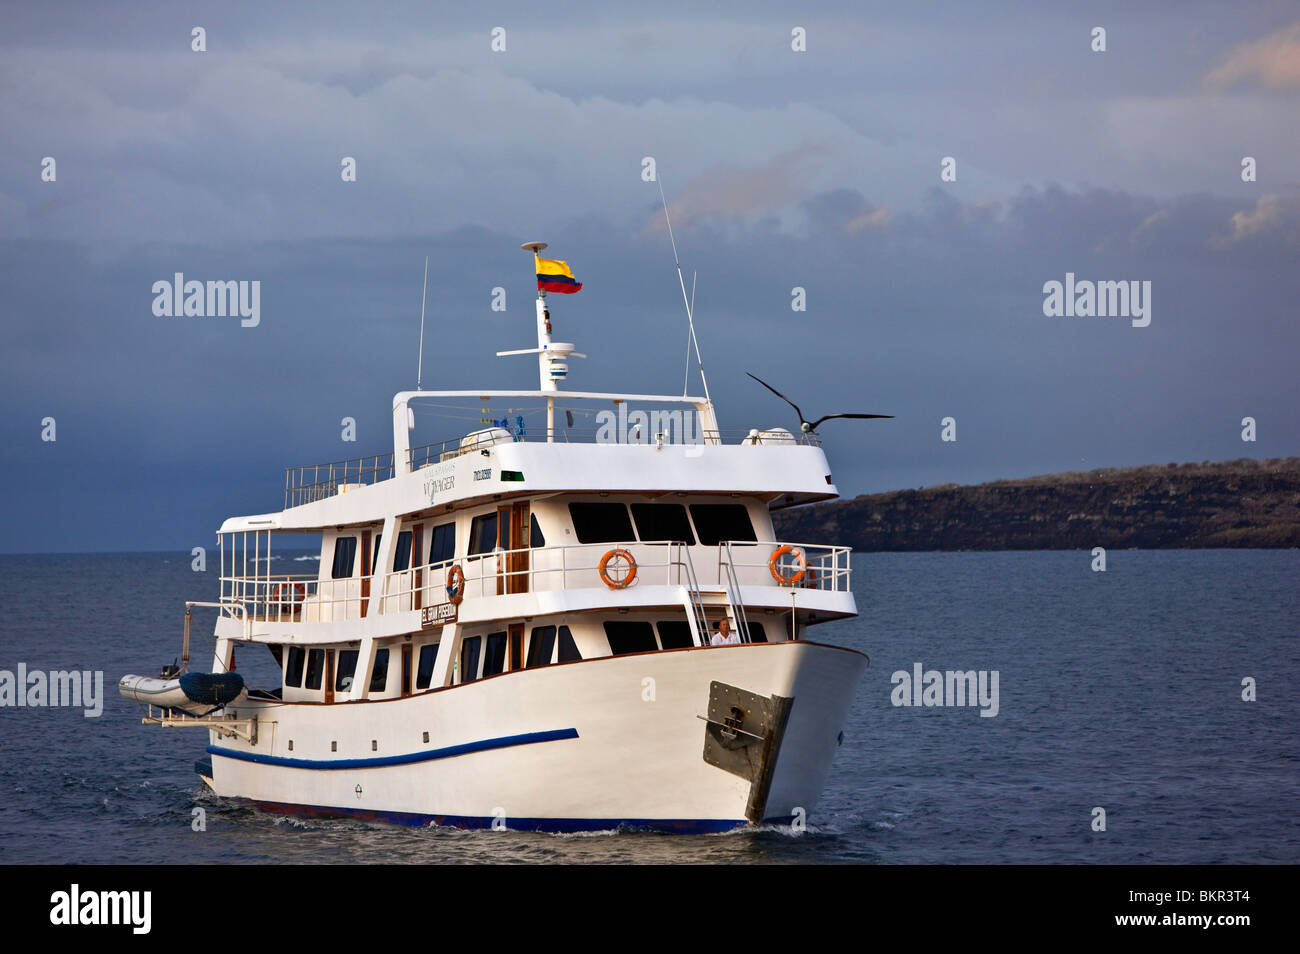 Galapagos Islands, The motor yacht Galapagos Voyager arrives off Genovese. Stock Photo